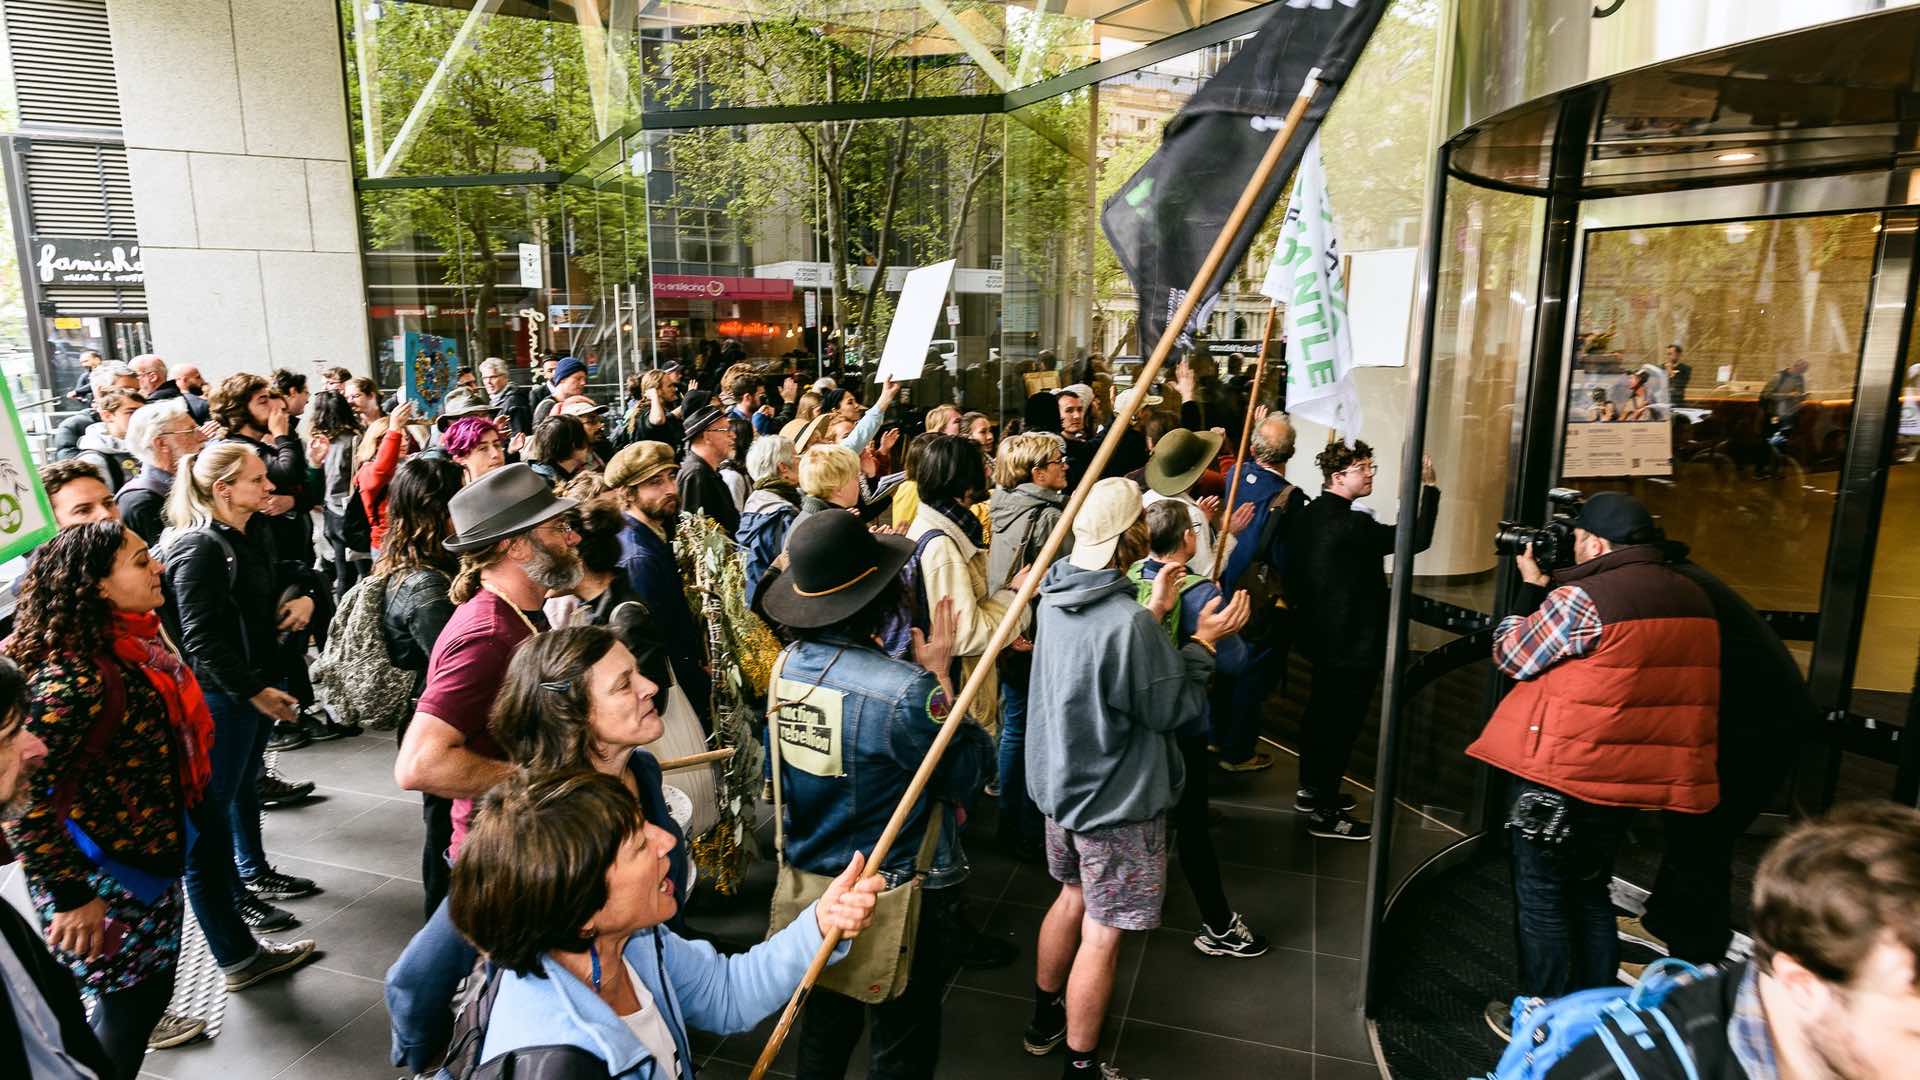 Melbourne Can Expect Multiple Days of Climate Change Protests This Week